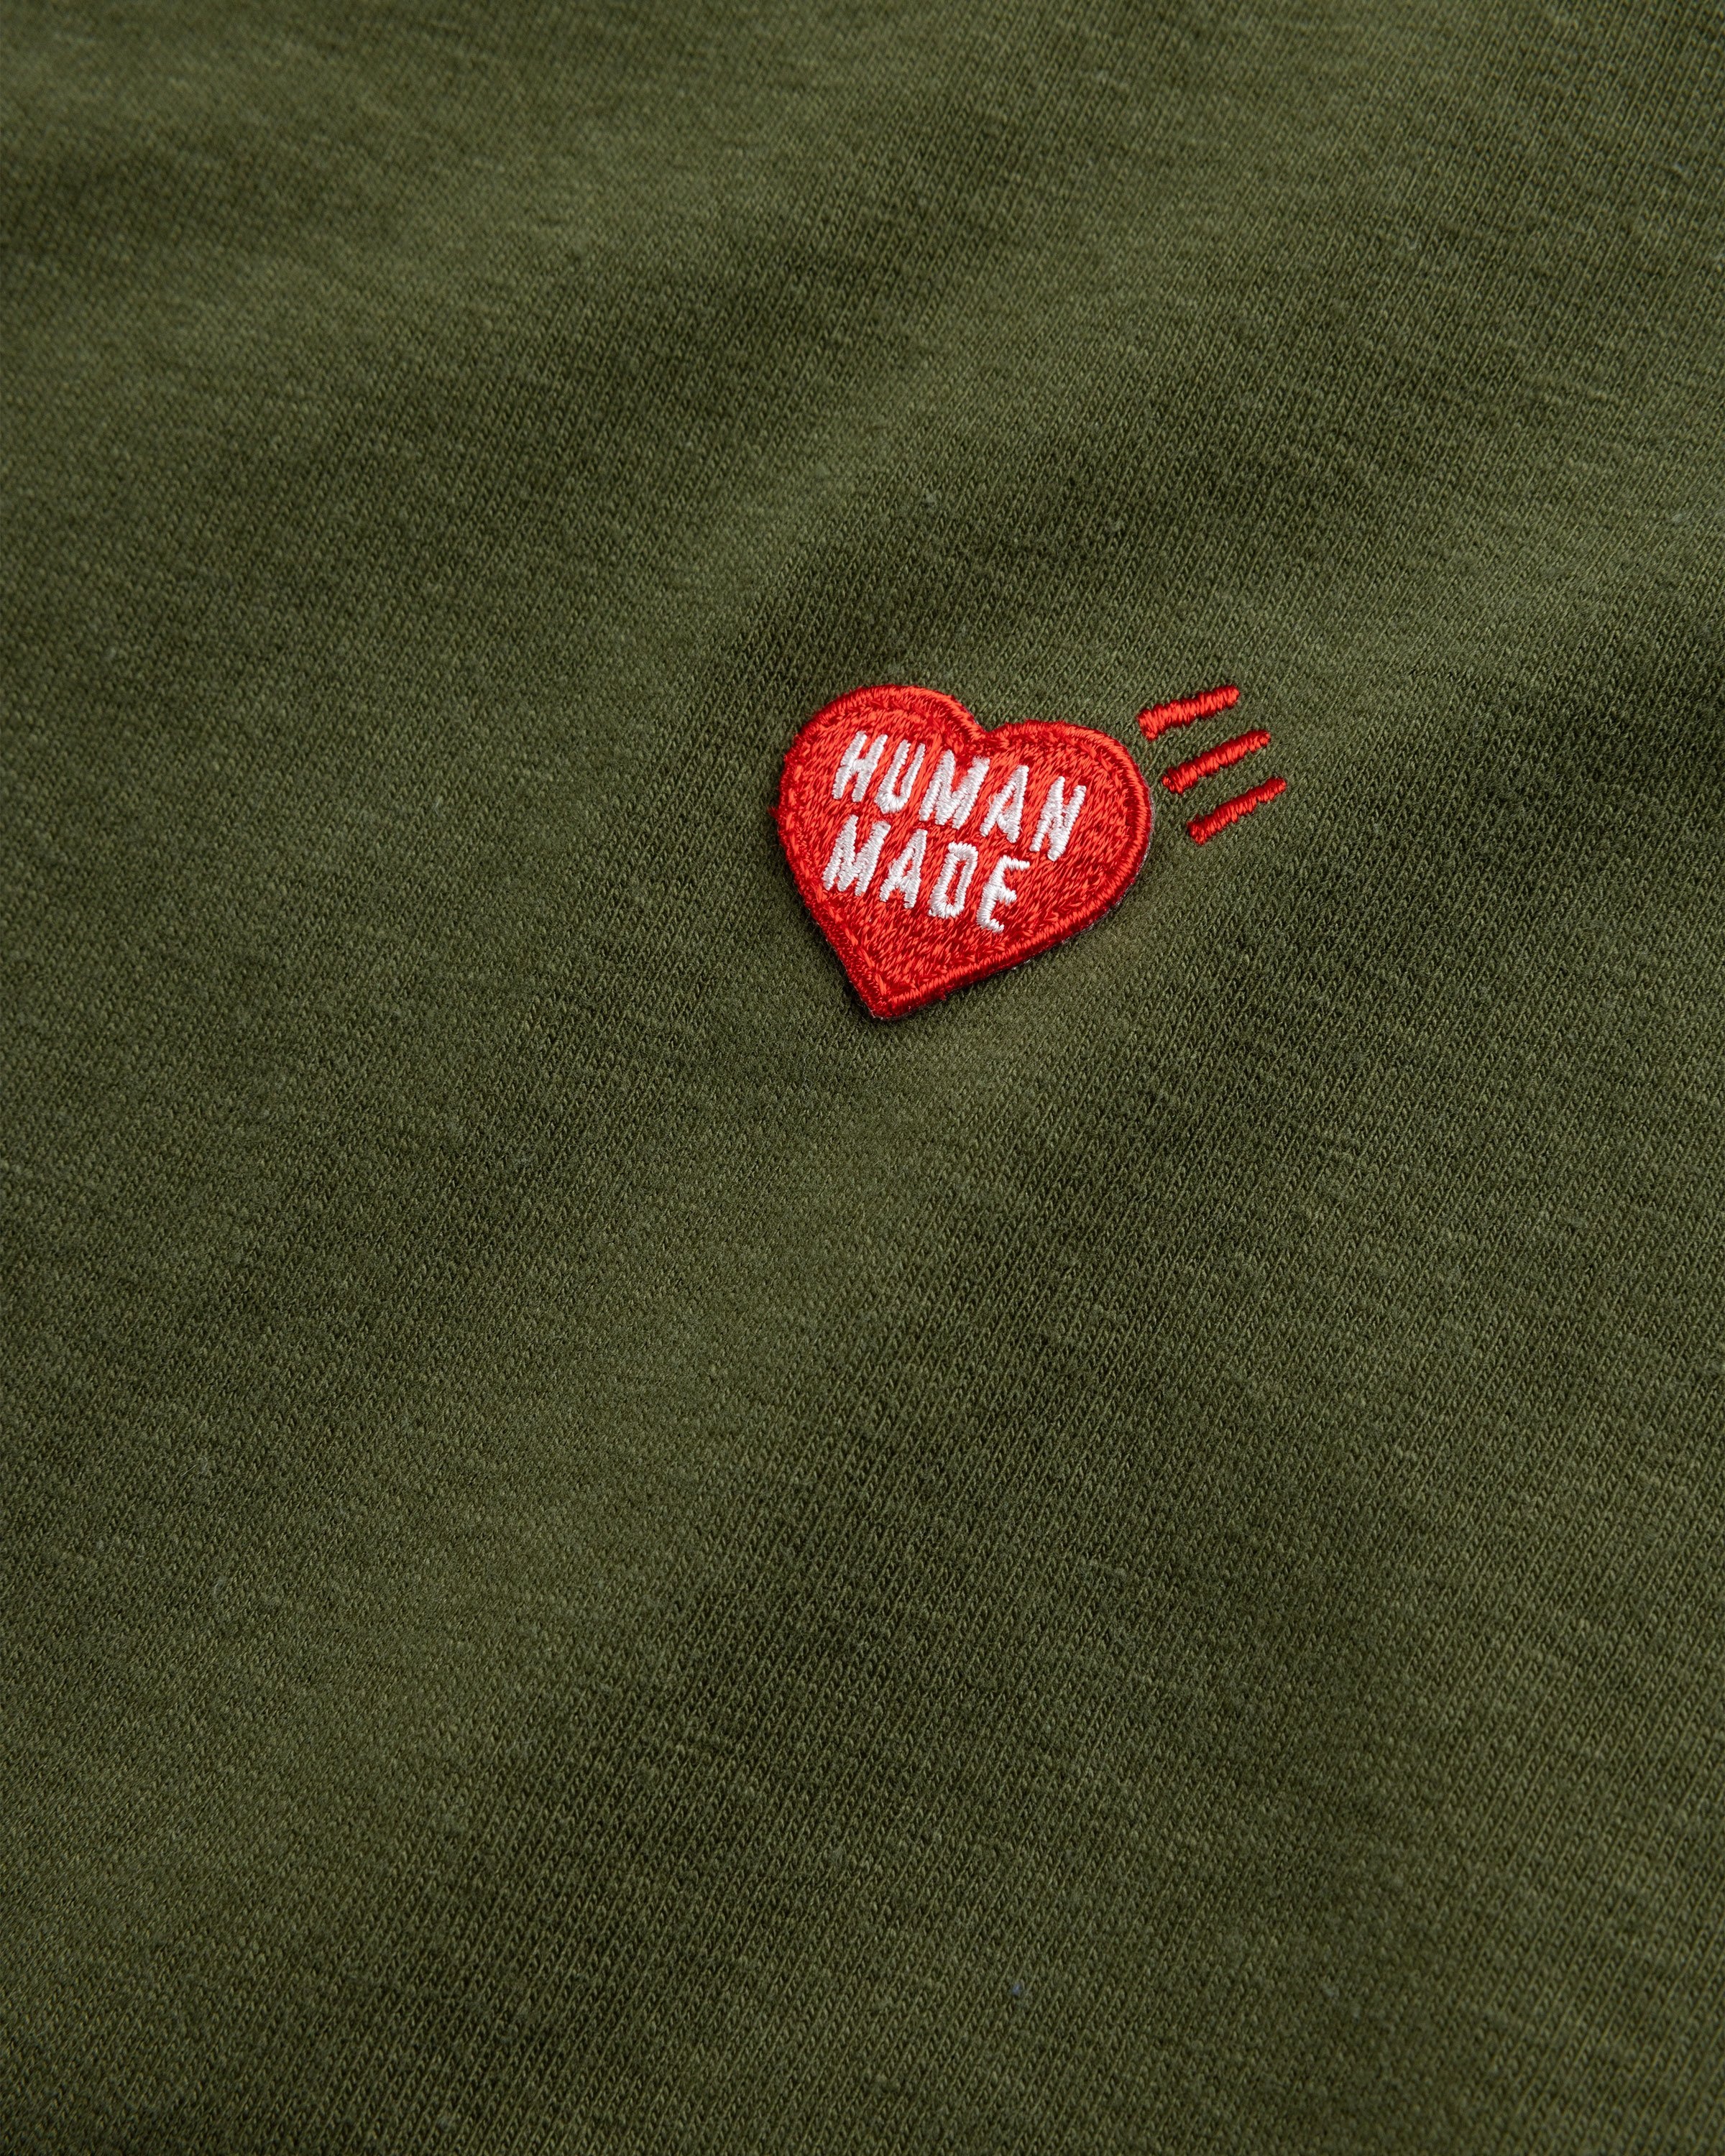 Human Made – GRAPHIC L/S T-SHIRT #1 Olive Drab